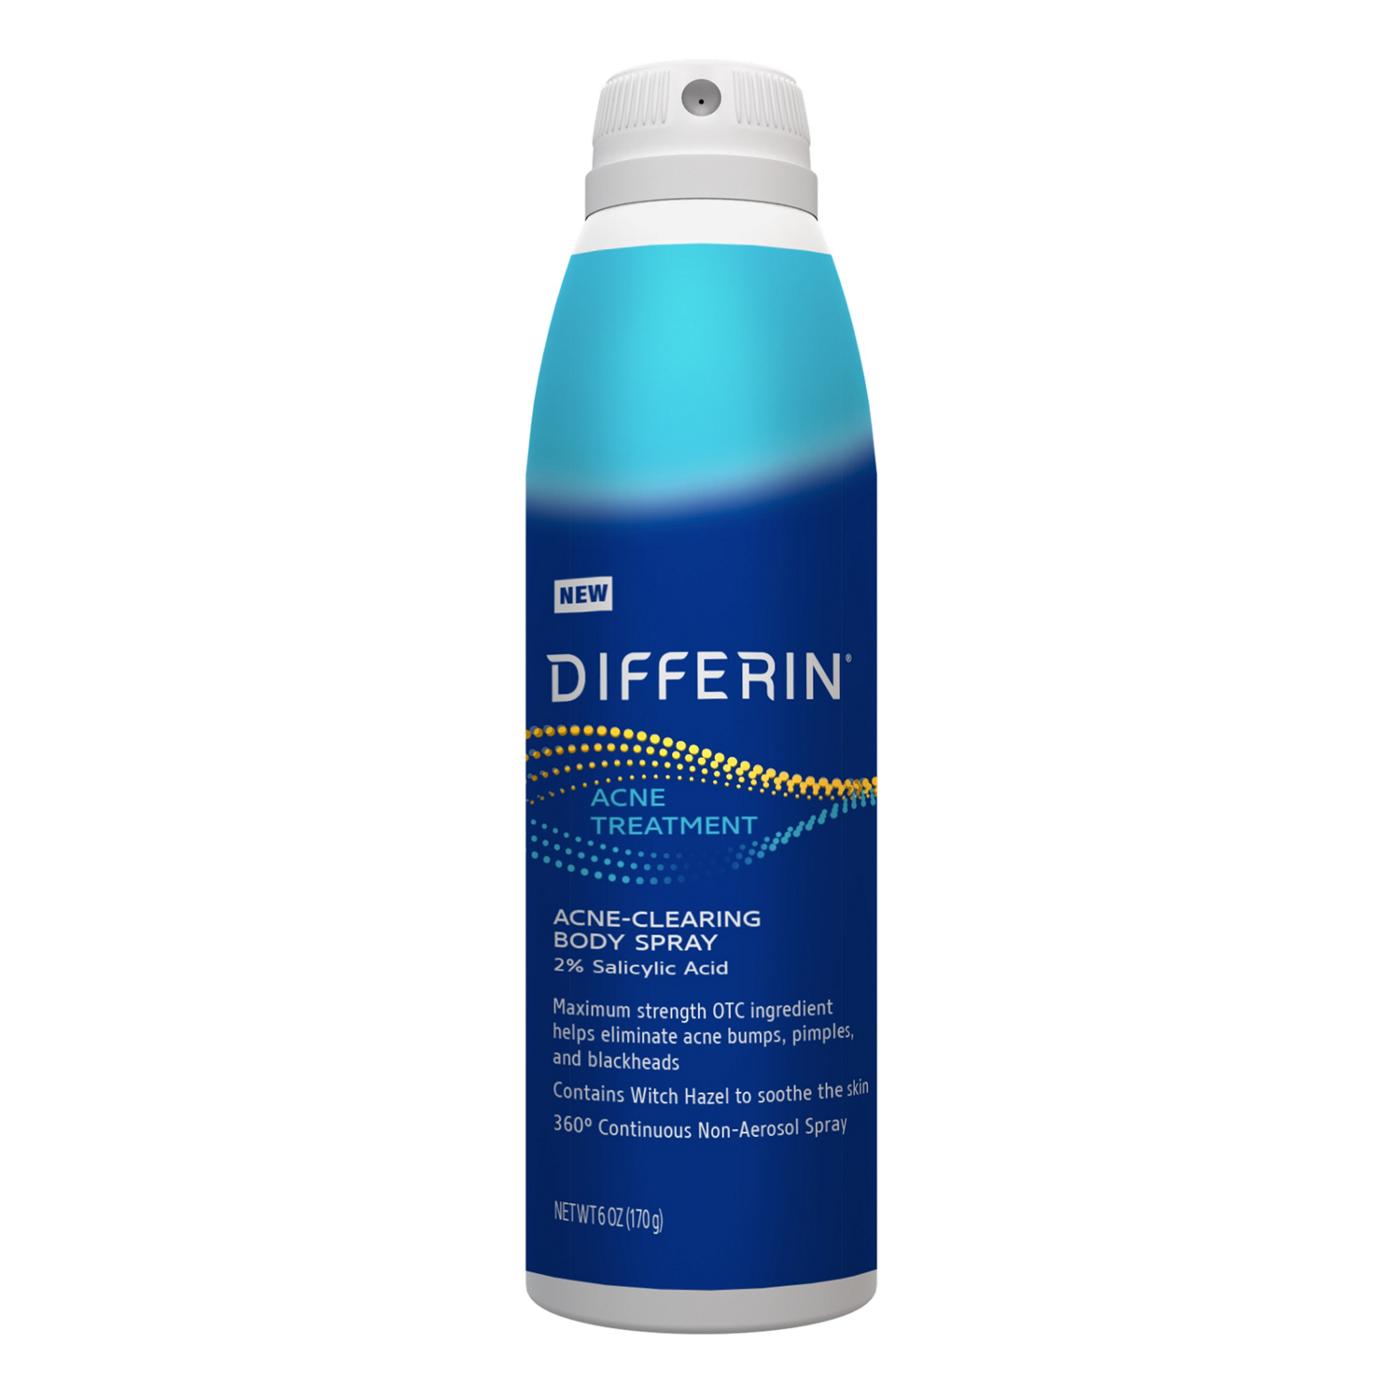 Differin Acne-Clearing Body Spray; image 1 of 3